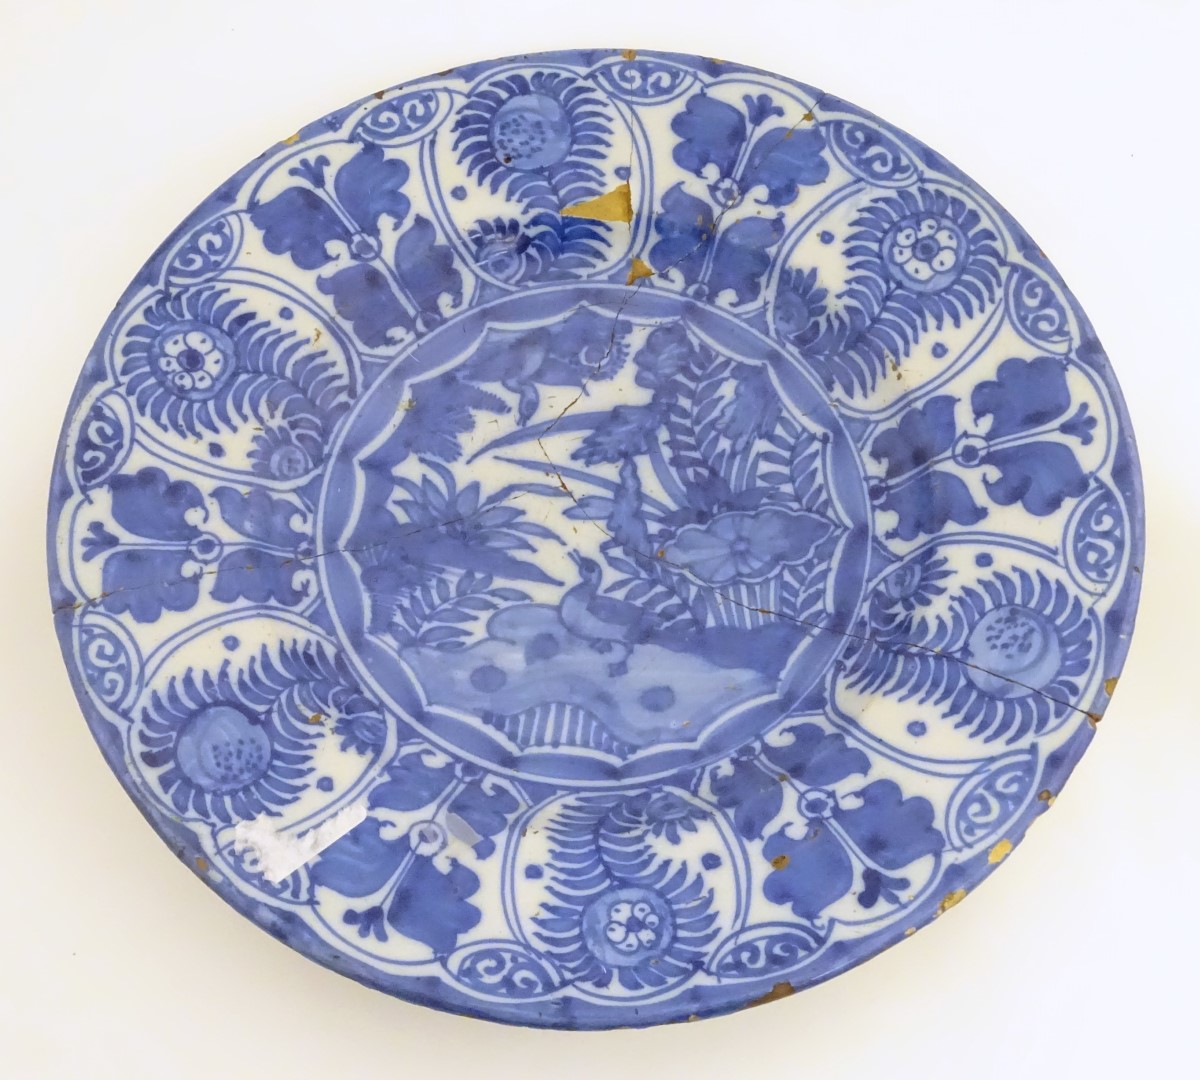 A blue and white Chinese Export Kraak style charger, with panelled decoration depicting stylised